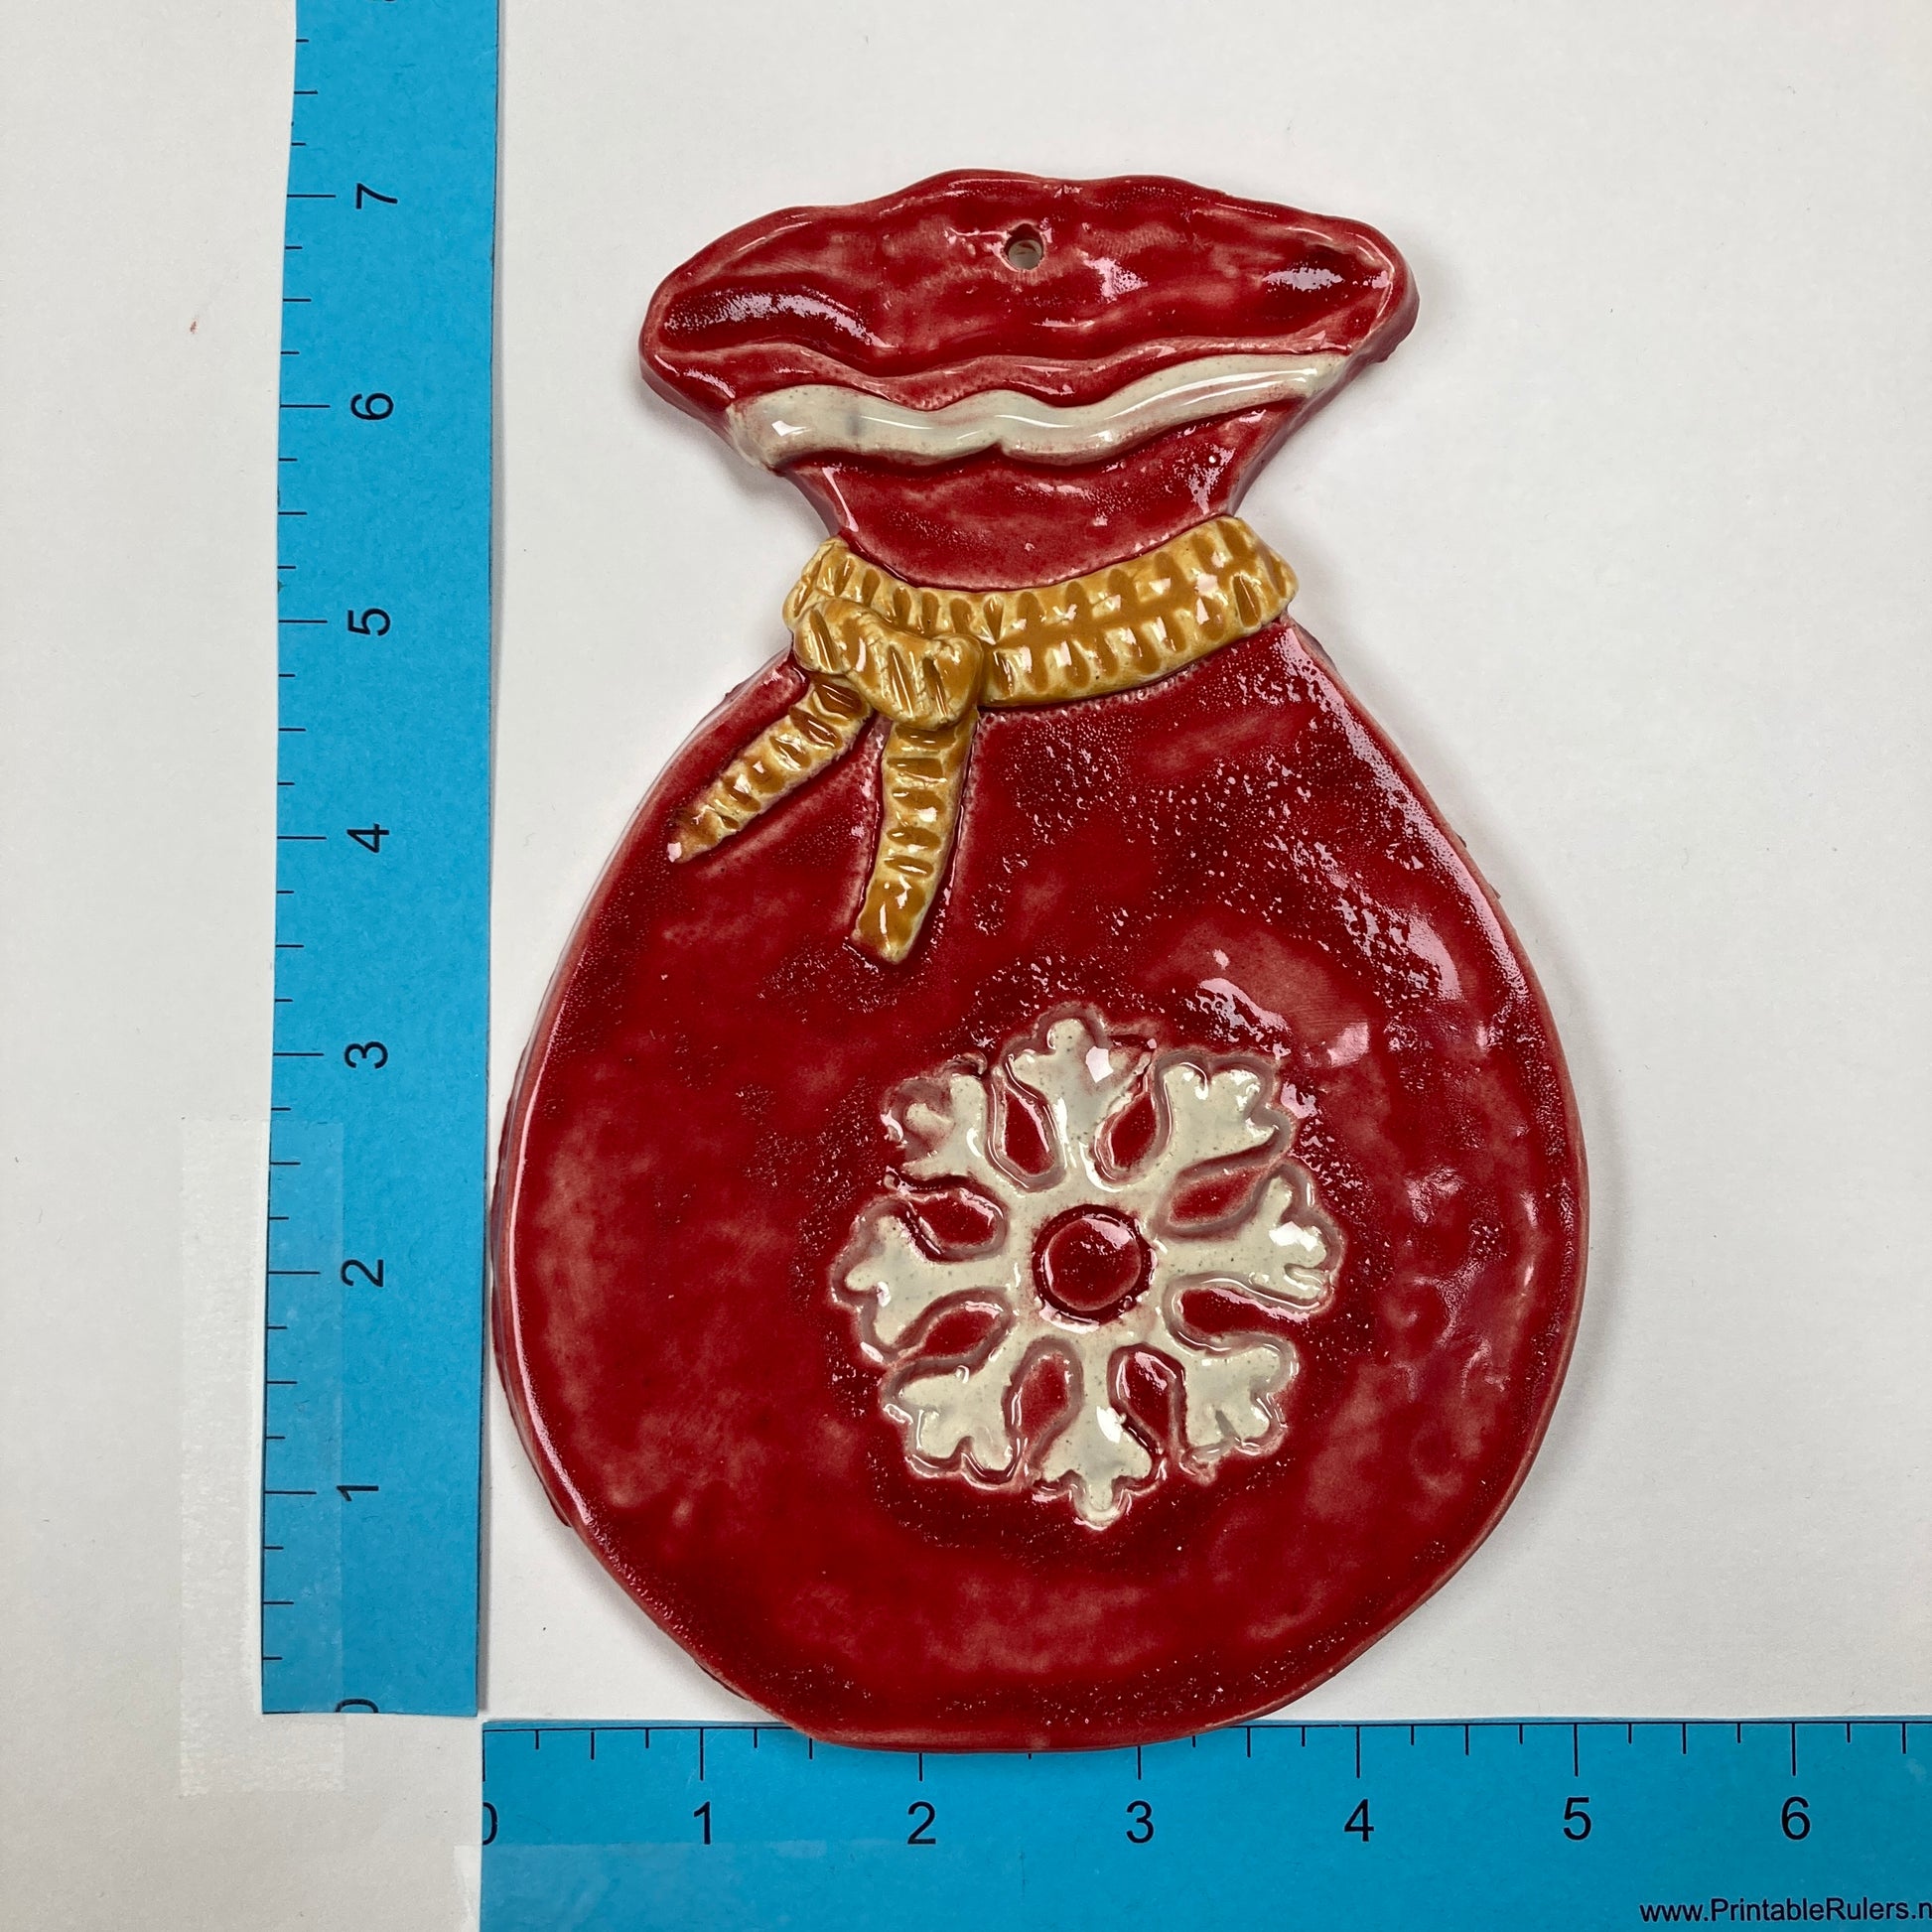 WATCH Resources Art Guild - Ceramic Arts Handmade Clay Crafts 7-inch x 5-inch Glazed Christmas Bag made by Lisa Uptain